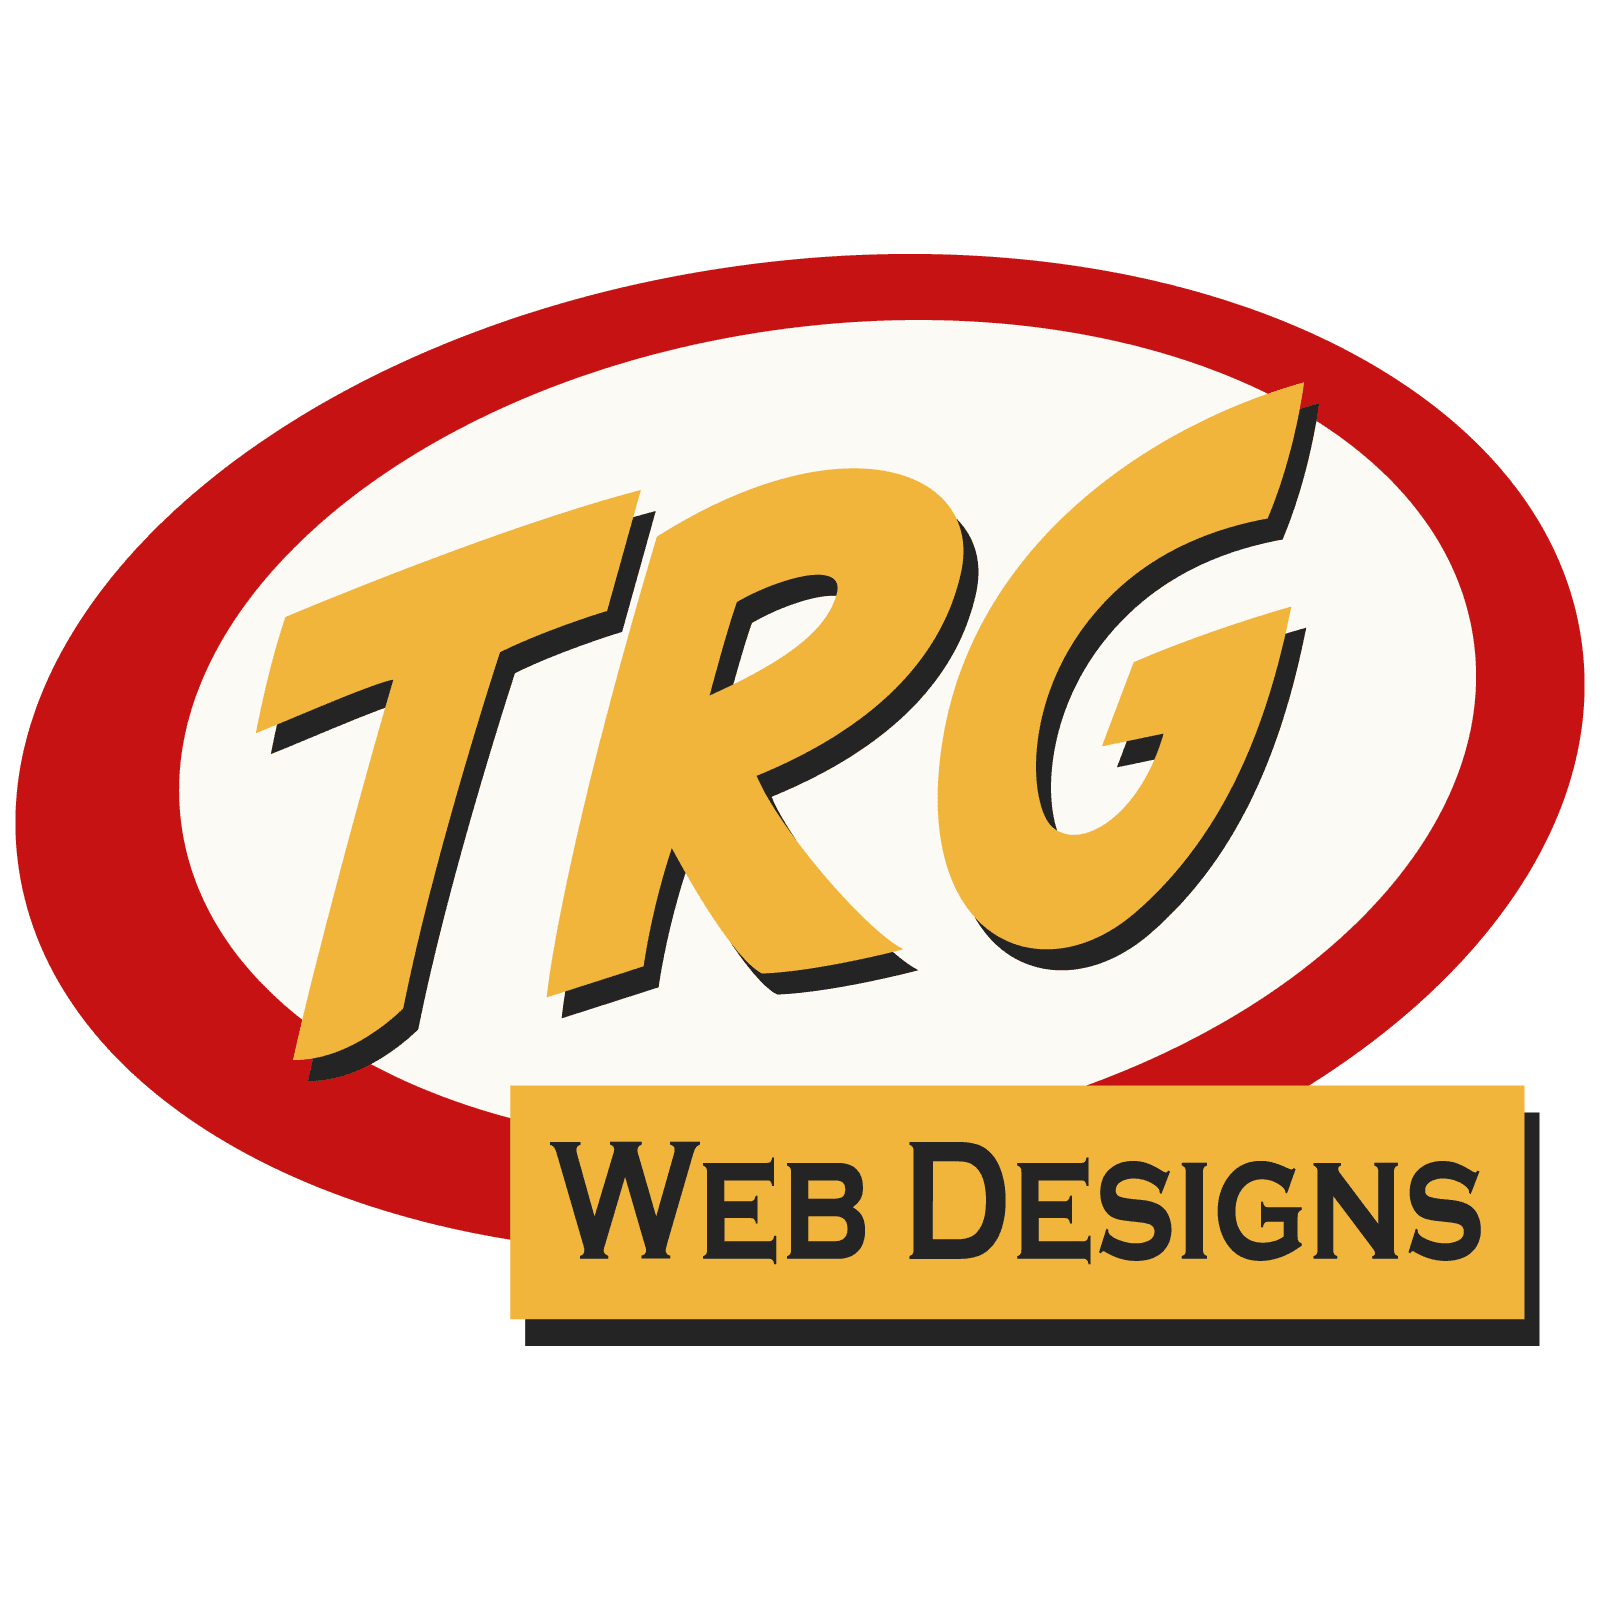 Trg Web Designs Websites That Engage